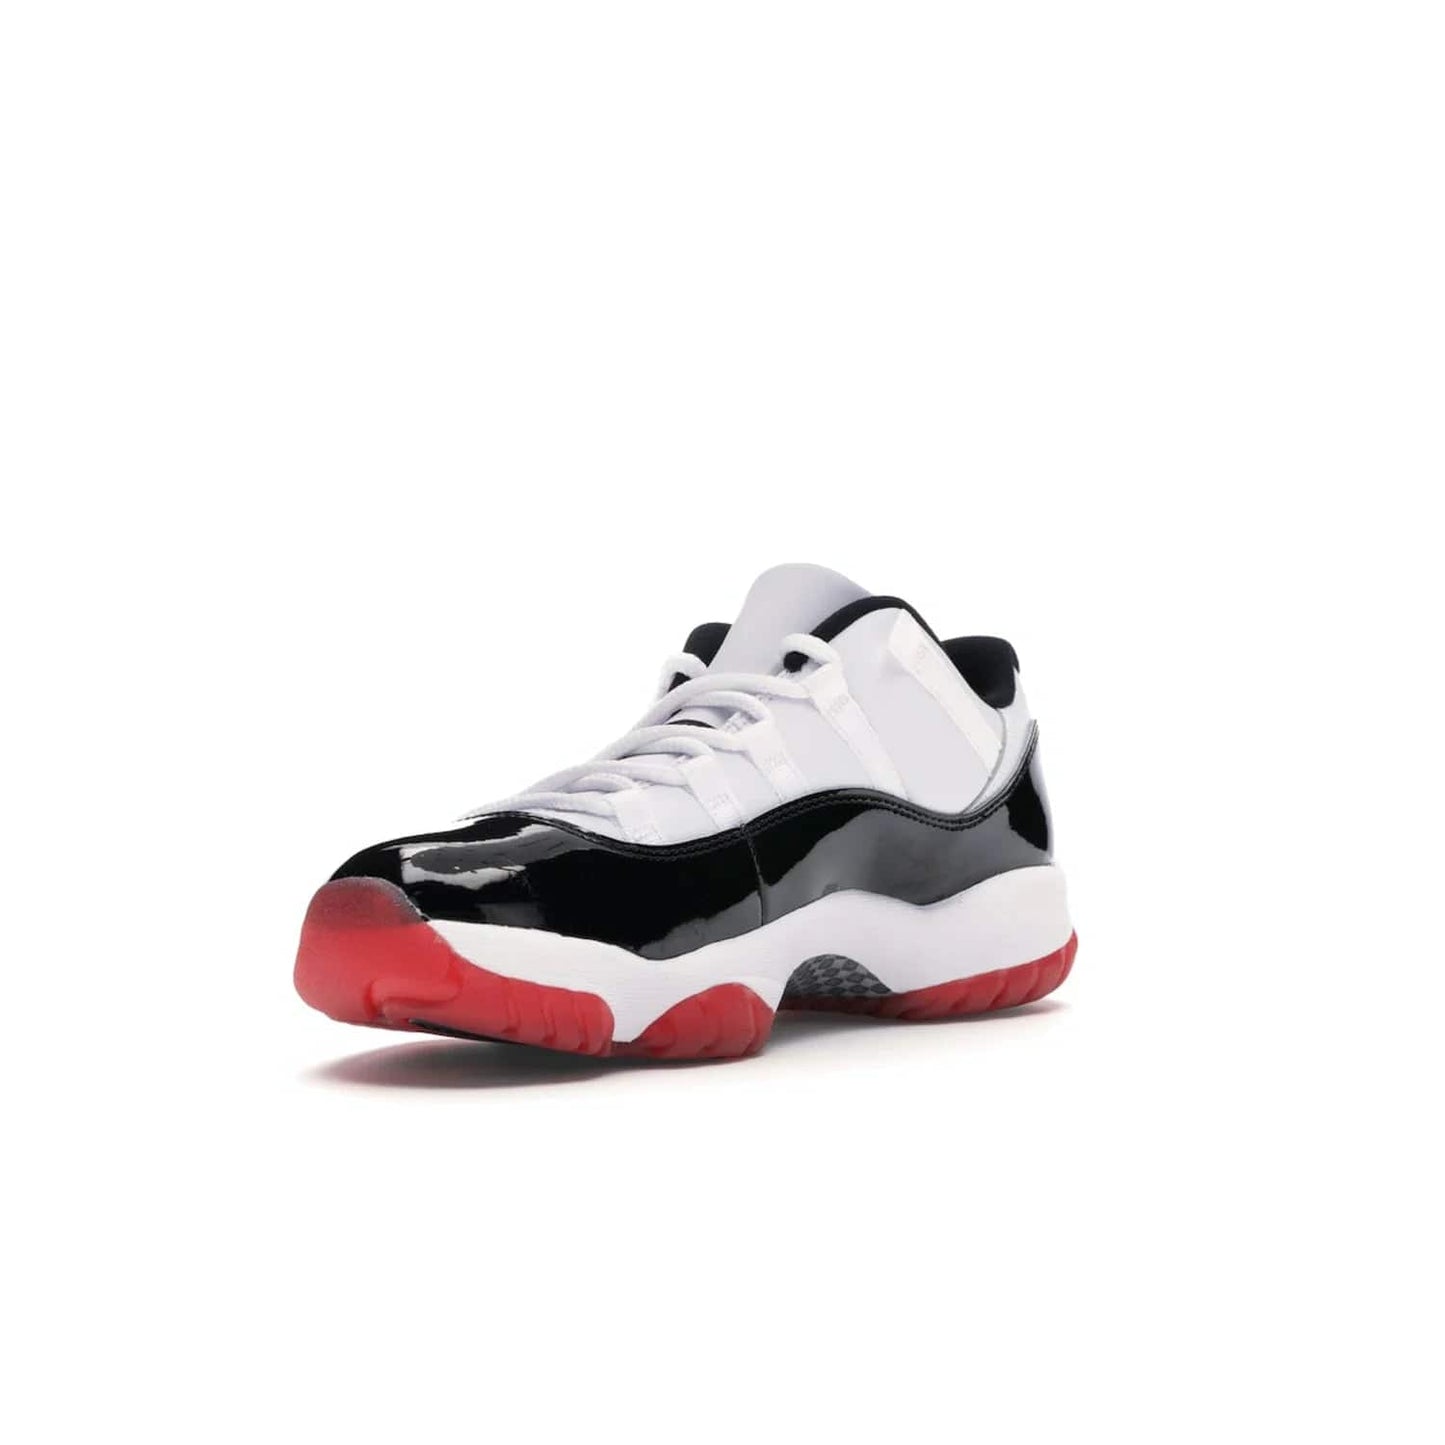 Jordan 11 Retro Low Concord Bred - Image 14 - Only at www.BallersClubKickz.com - Grab the classic Jordan 11 look with the Jordan 11 Retro Low Concord Bred. With white and black elements and the iconic red outsole of the Jordan 11 Bred, you won't miss a beat. Released in June 2020, the perfect complement to any outfit.